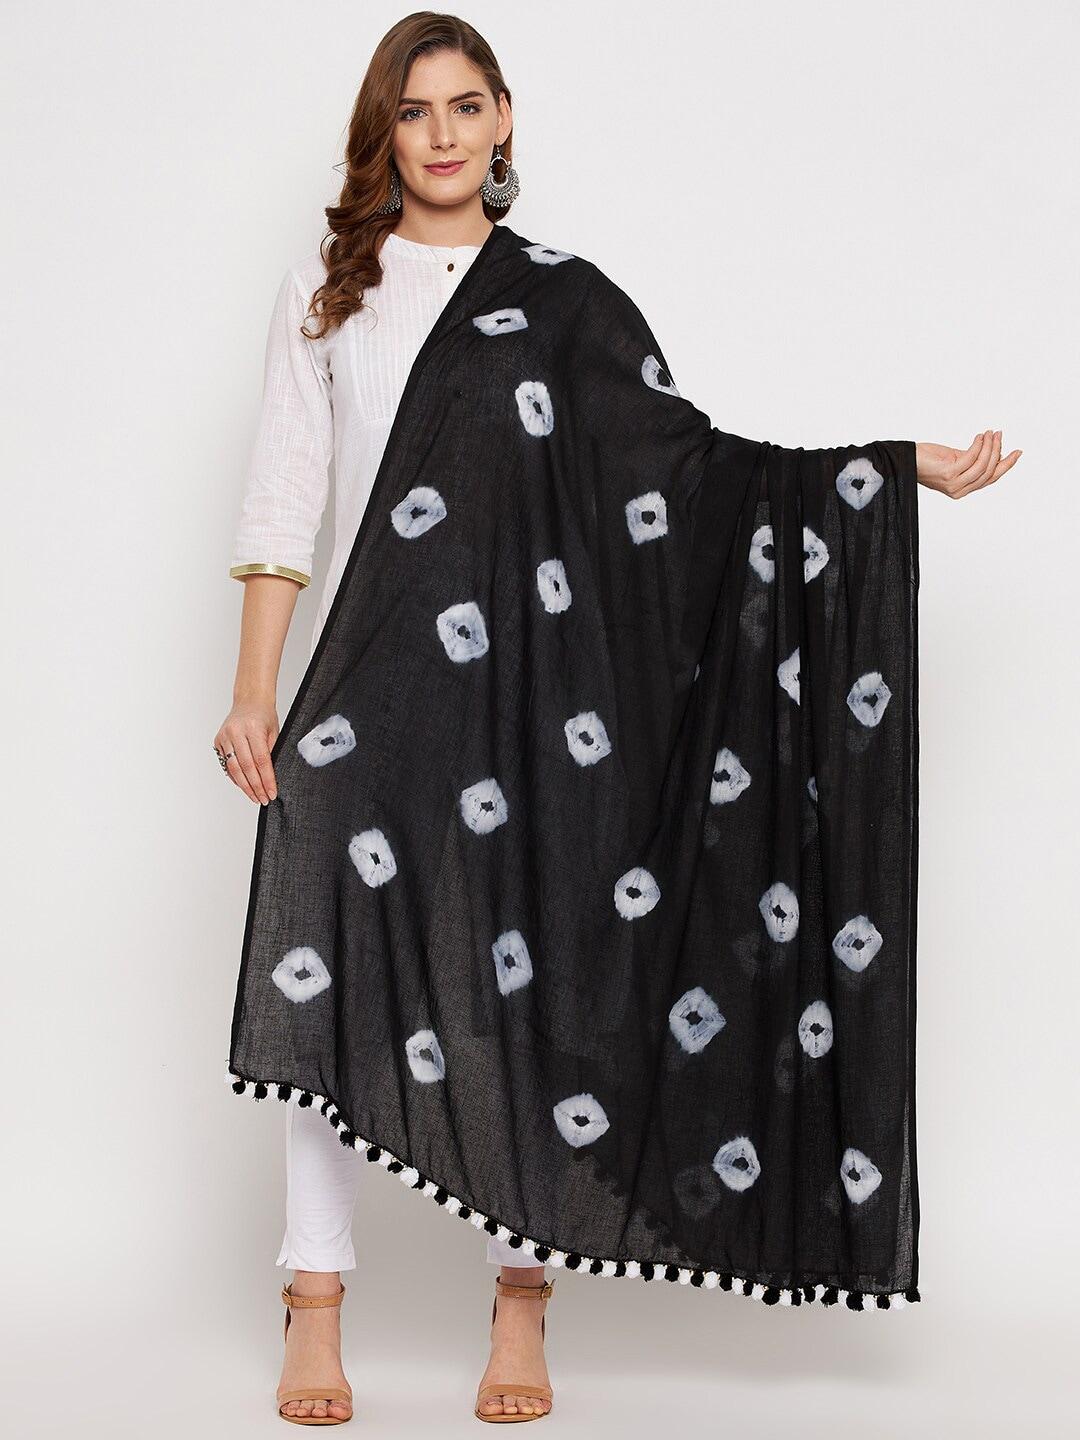 clora-creation-black-&-silver-toned-printed-pure-cotton-tie-and-dye-dupatta